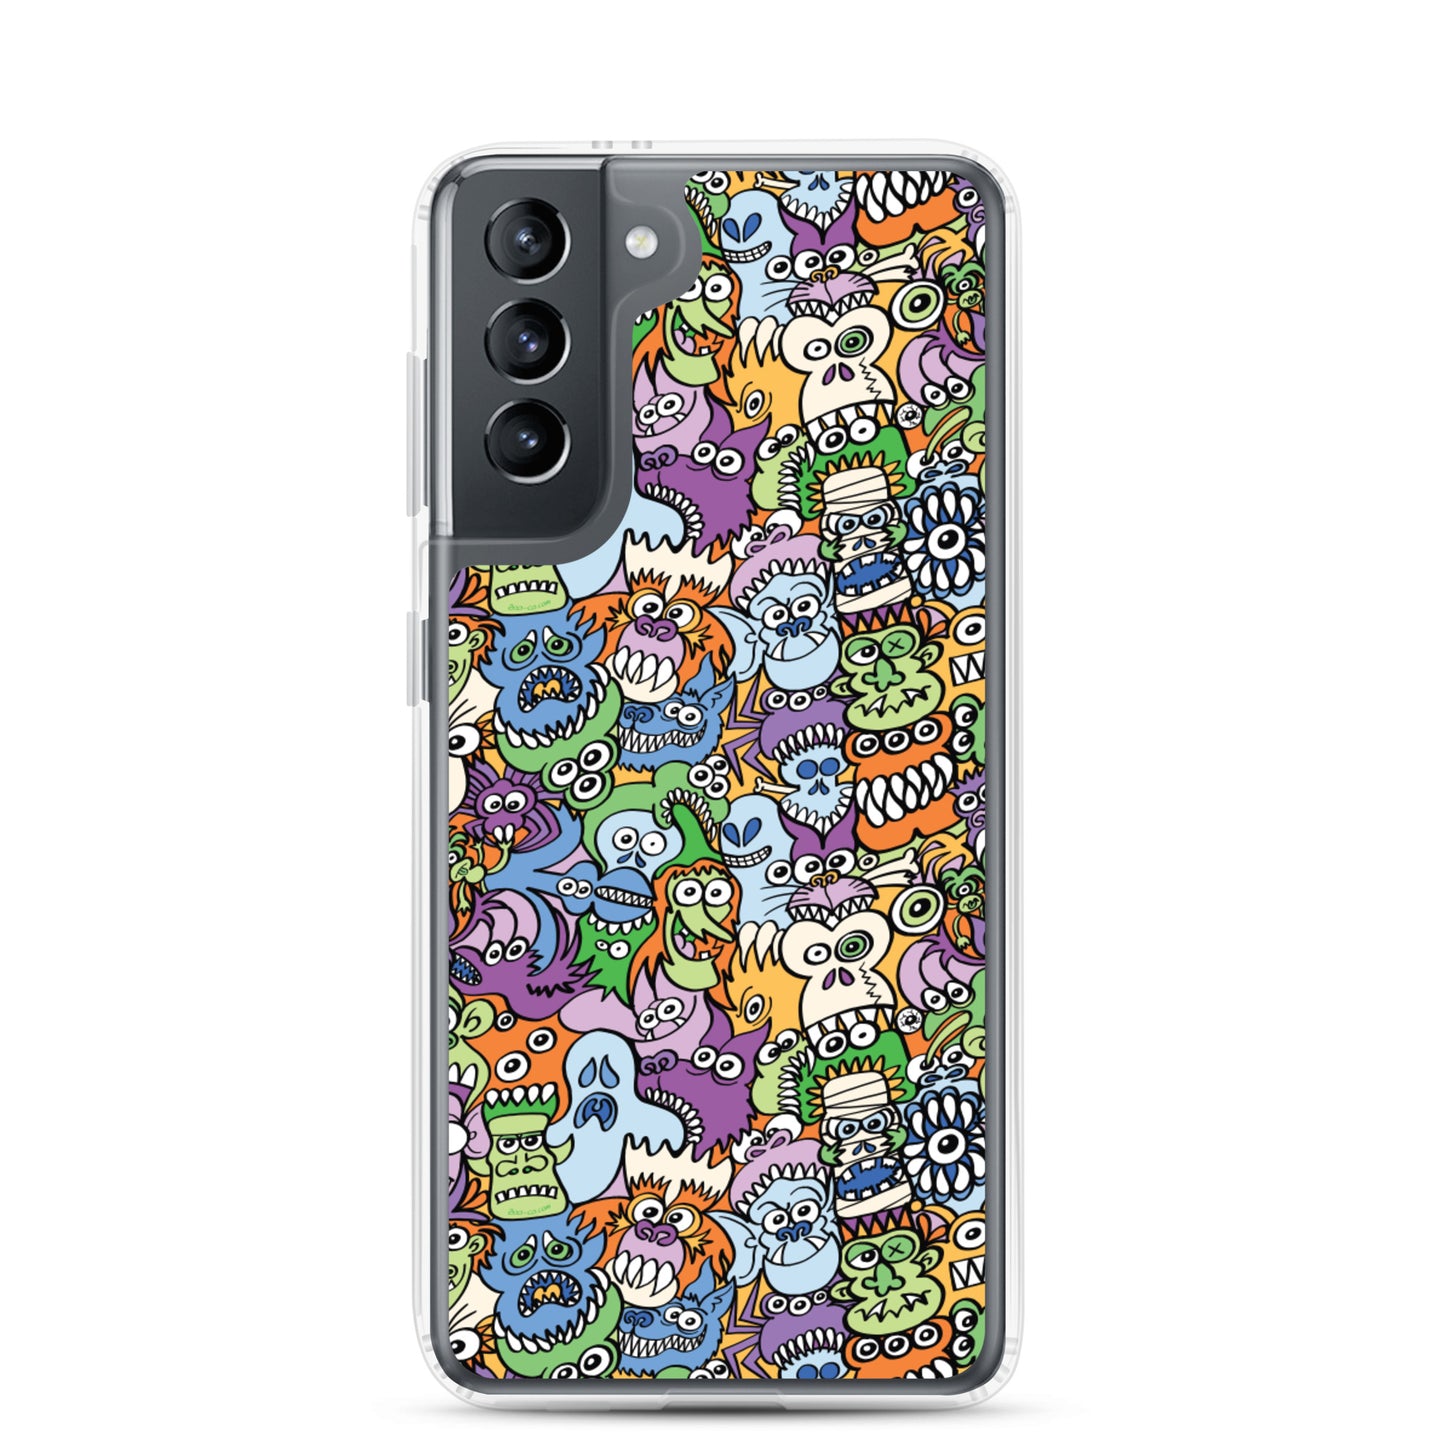 All the spooky Halloween monsters in a pattern design Samsung Case. s21